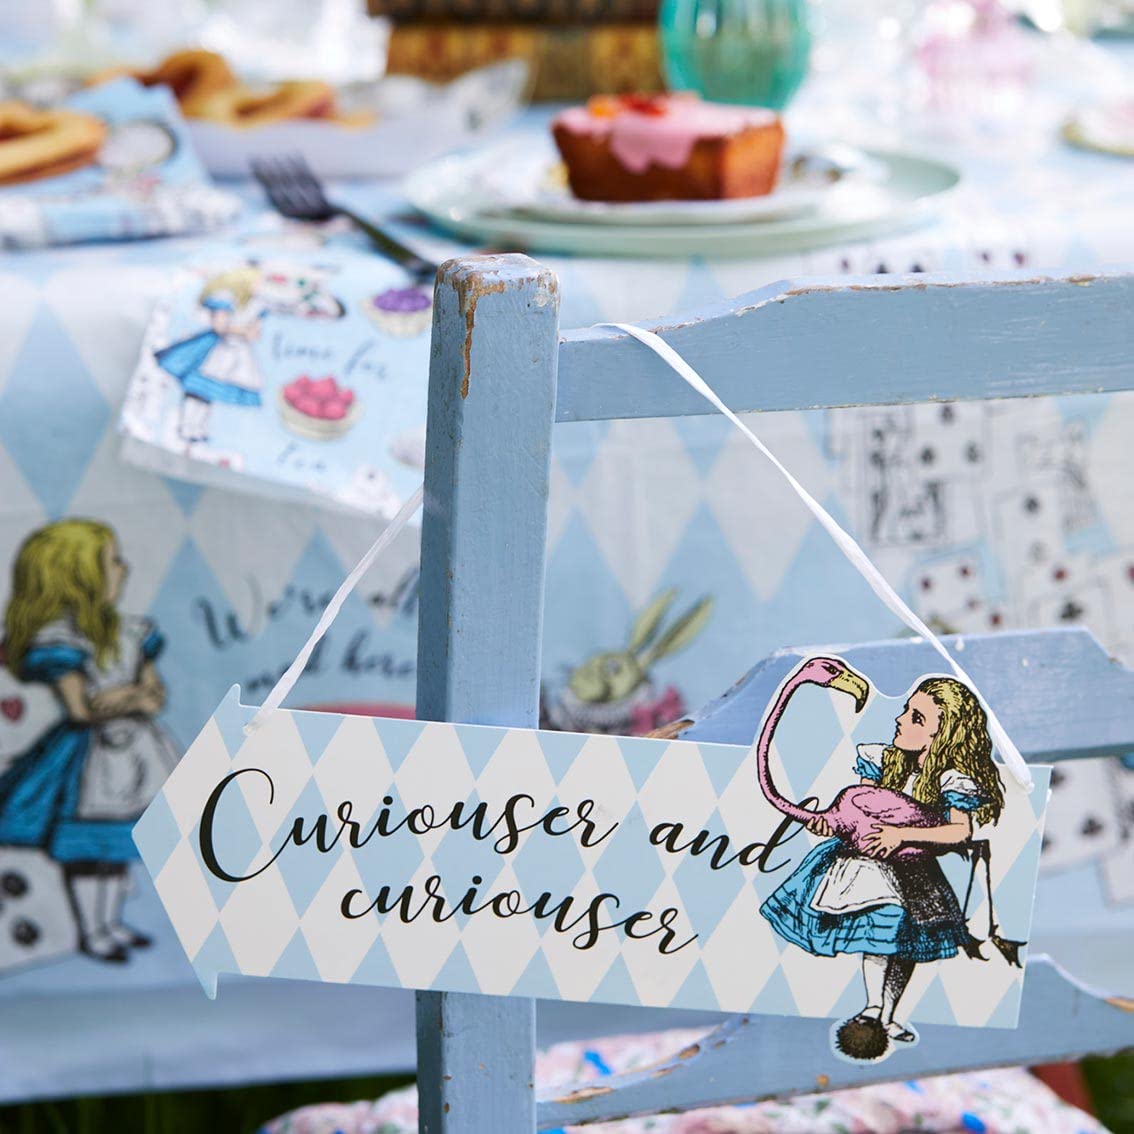 Talking Tables Pack of 12 Alice in Wonderland Party Decorations | Arrow Signs for Mad Hatters Tea Party with Quotes and Characters from Book